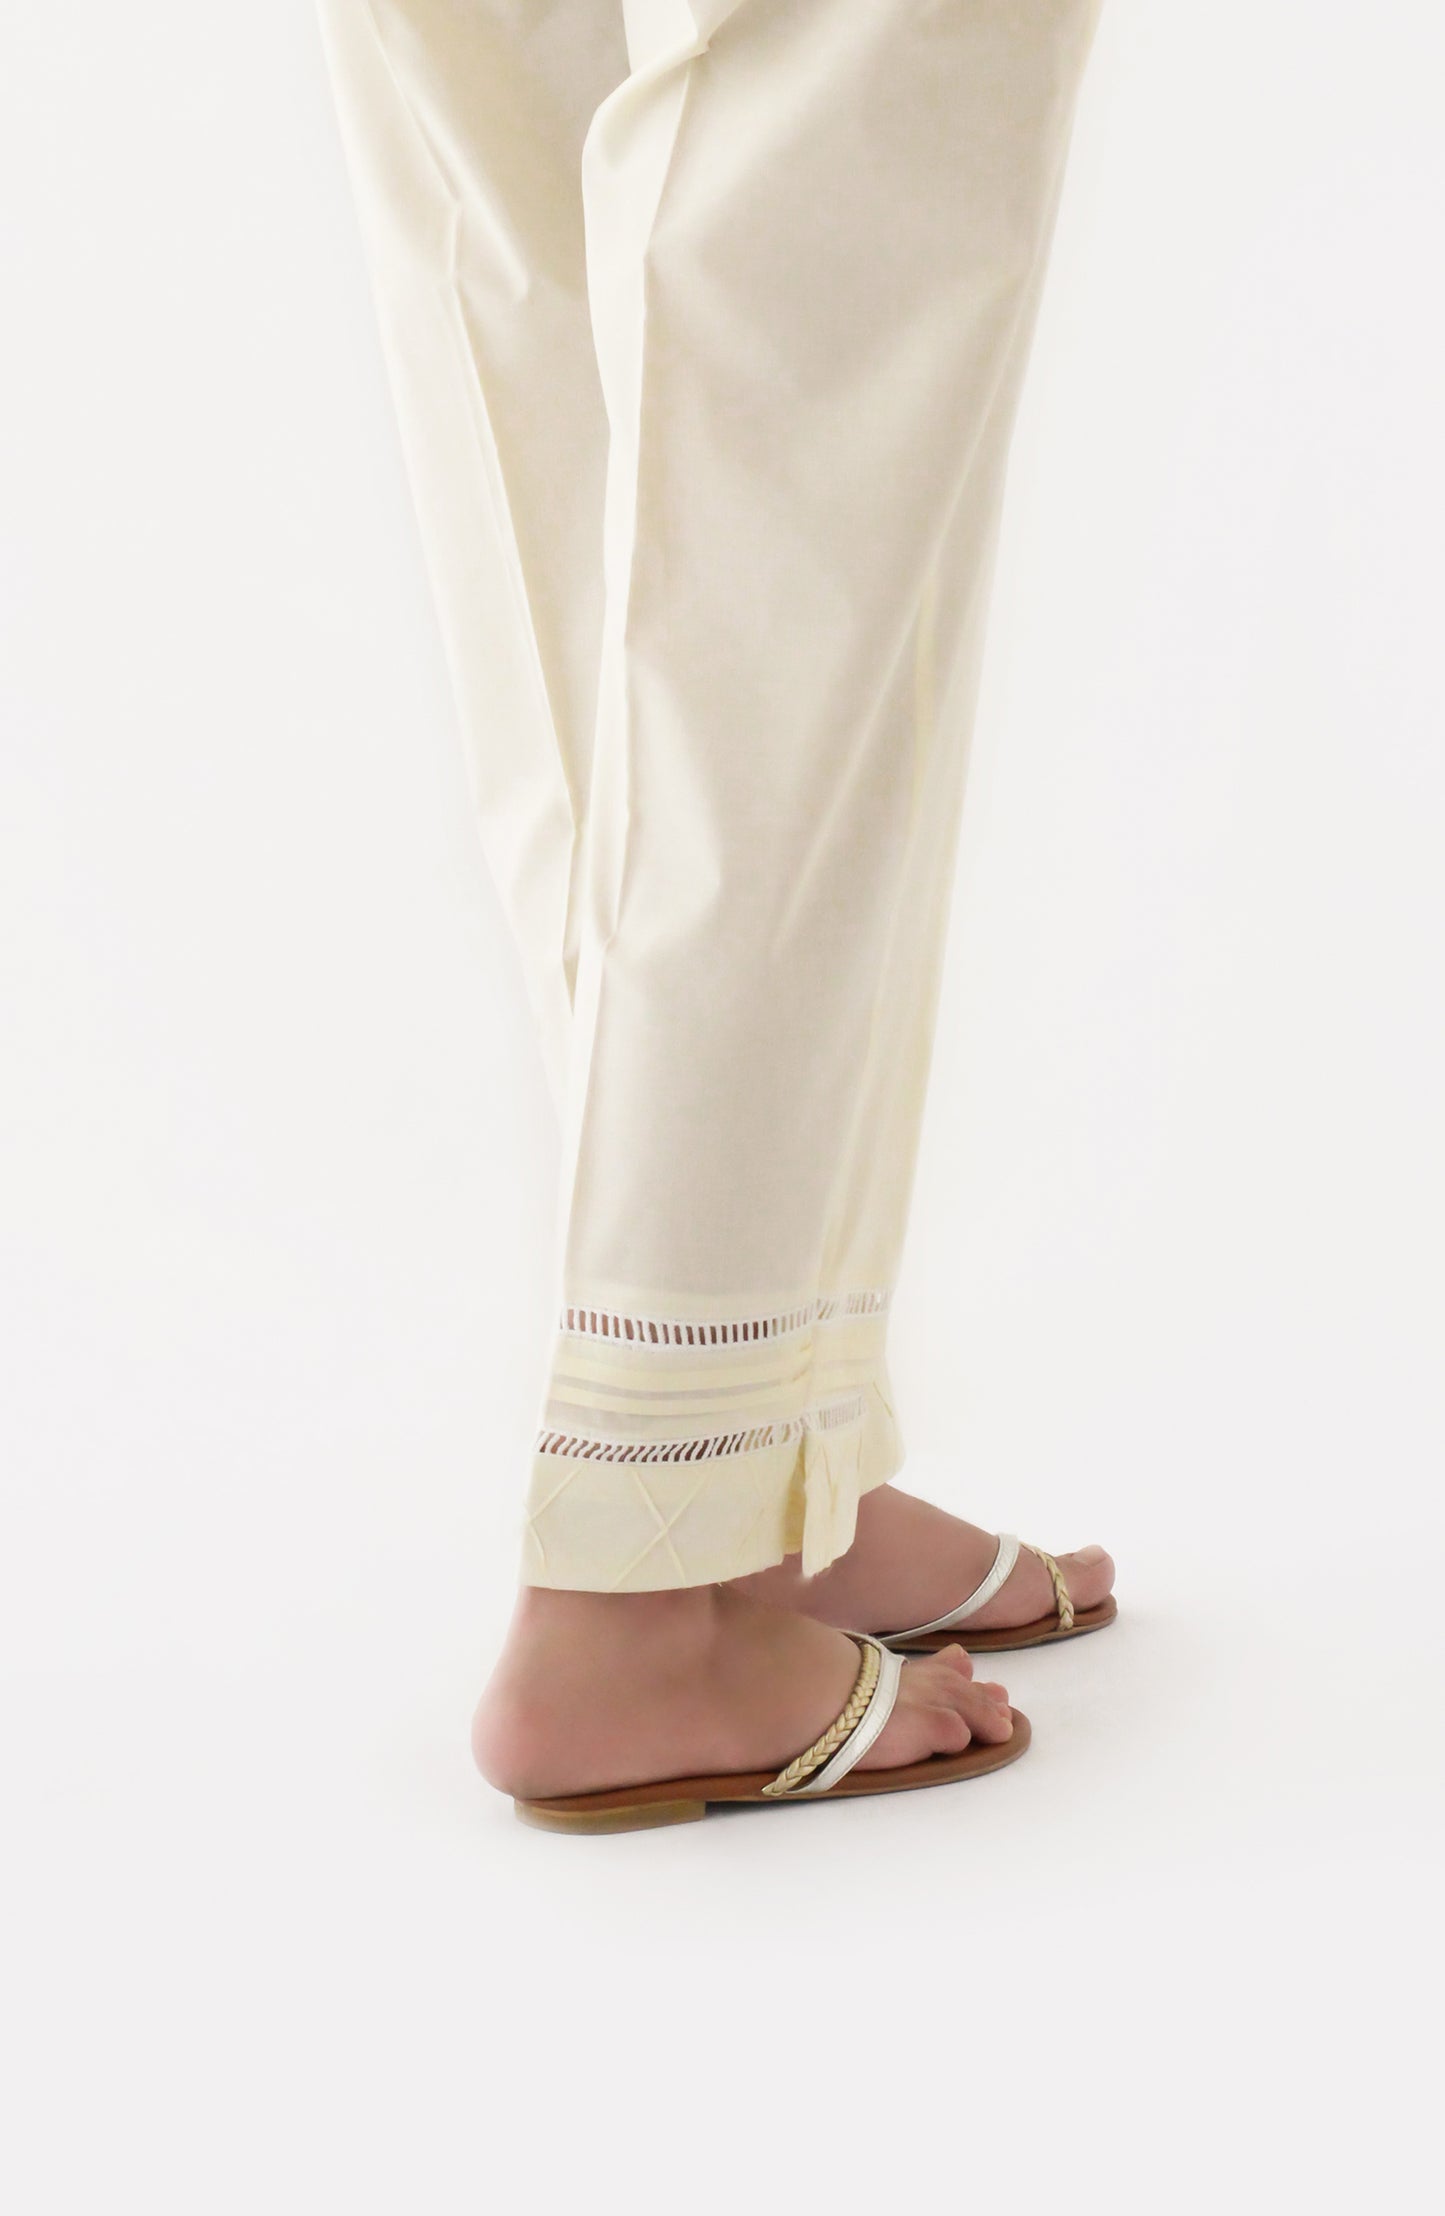 NRP-123/S CREAM CAMBRIC SCPANTS STITCHED BOTTOMS PANTS